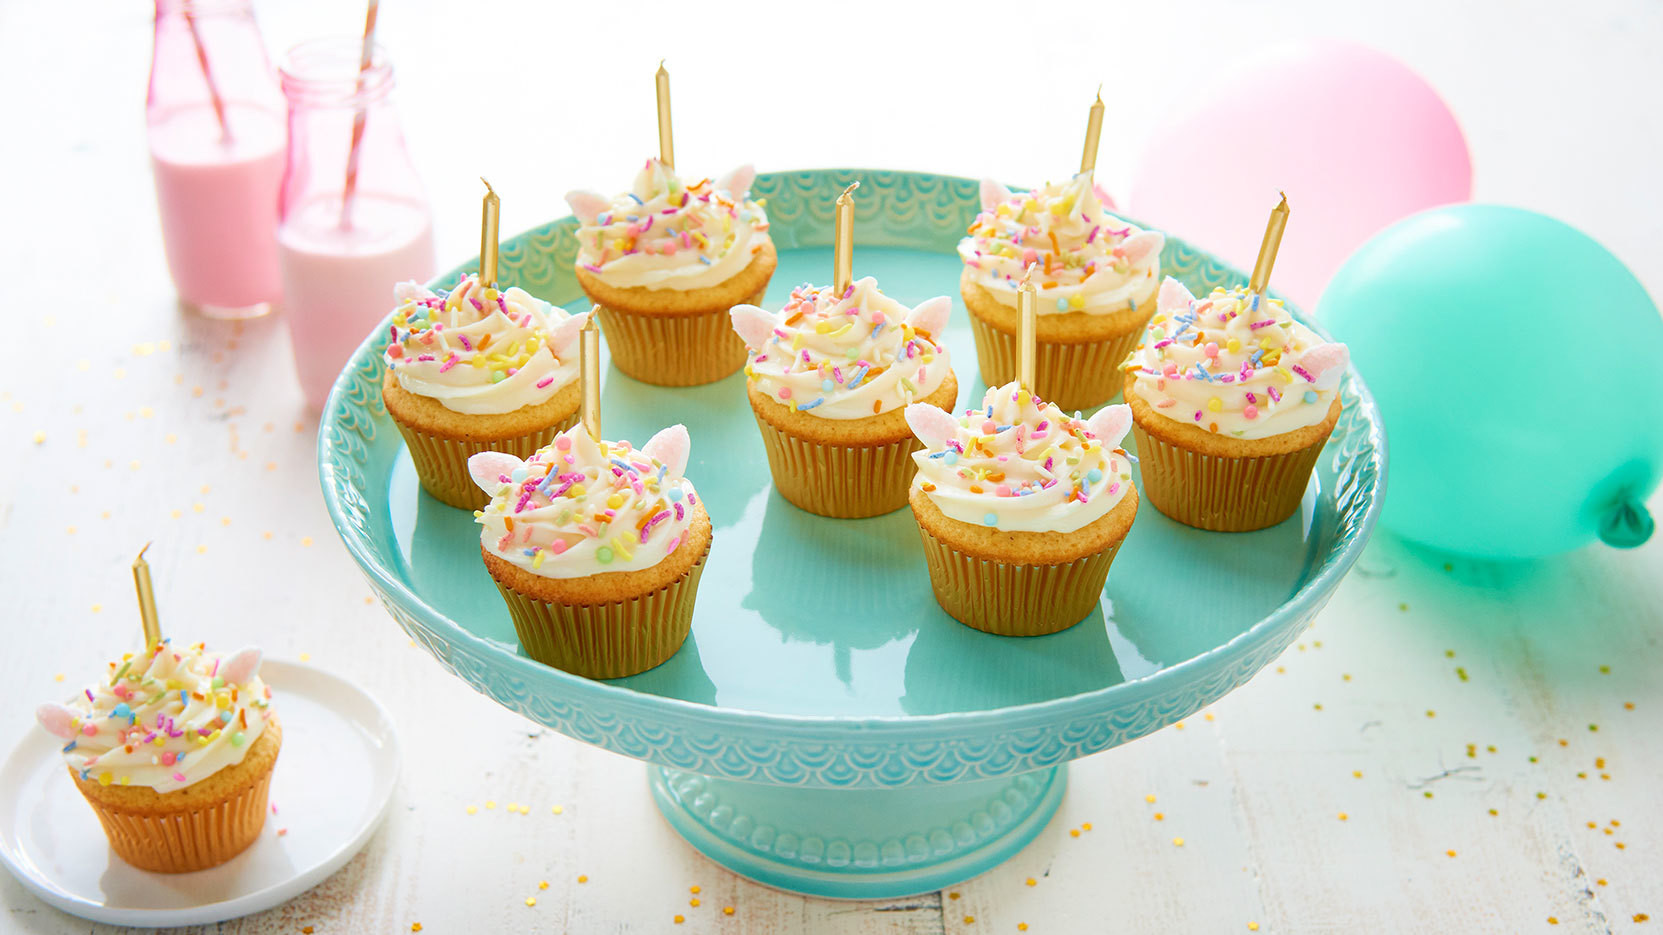 Kids Unicorn Party Food Ideas
 Magical Unicorn Birthday Party Ideas for Kids EatingWell